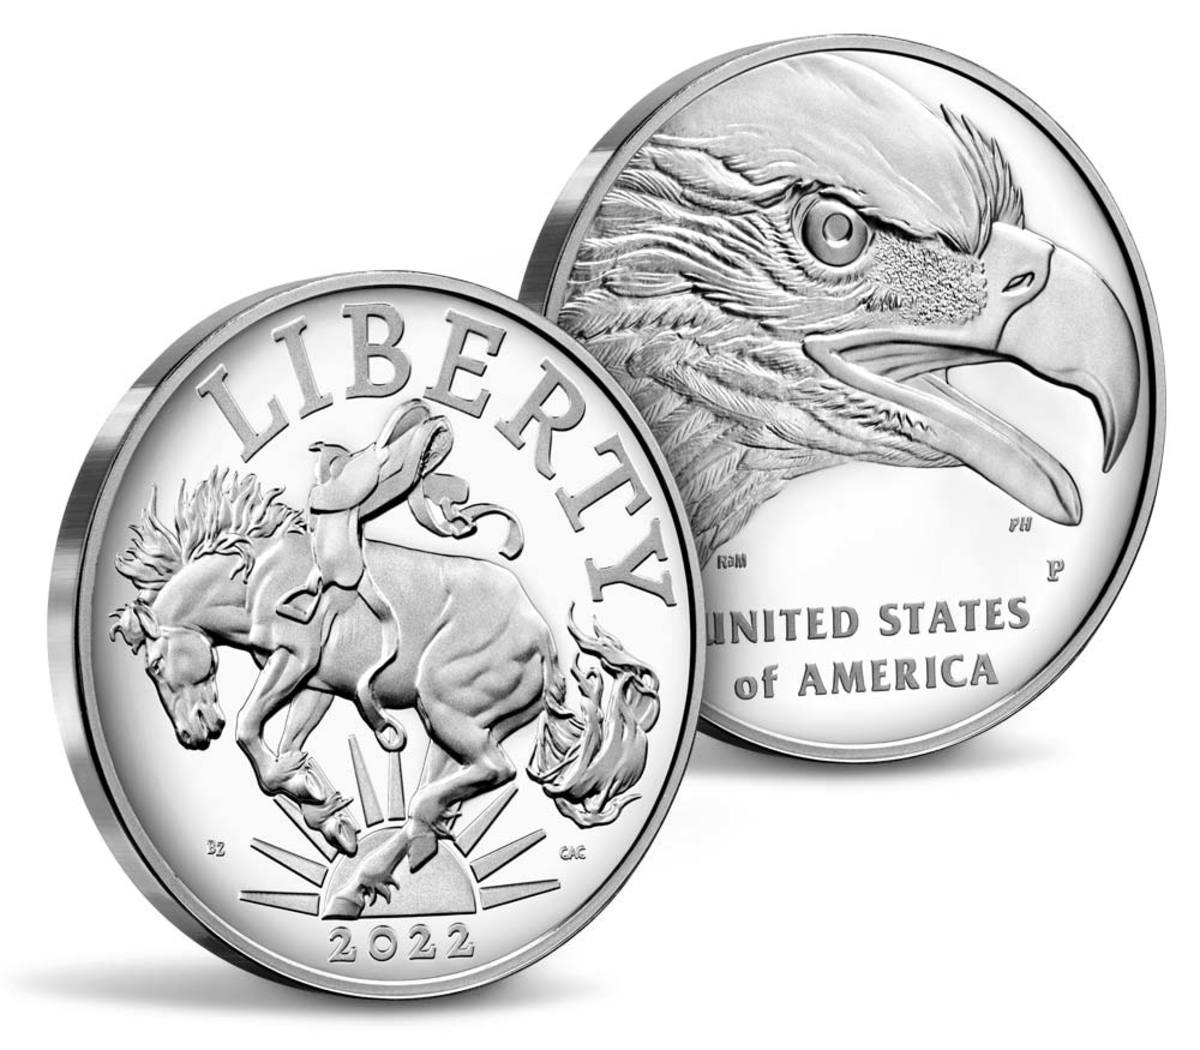 2022 American Liberty silver medal. (Image courtesy United States Mint.)